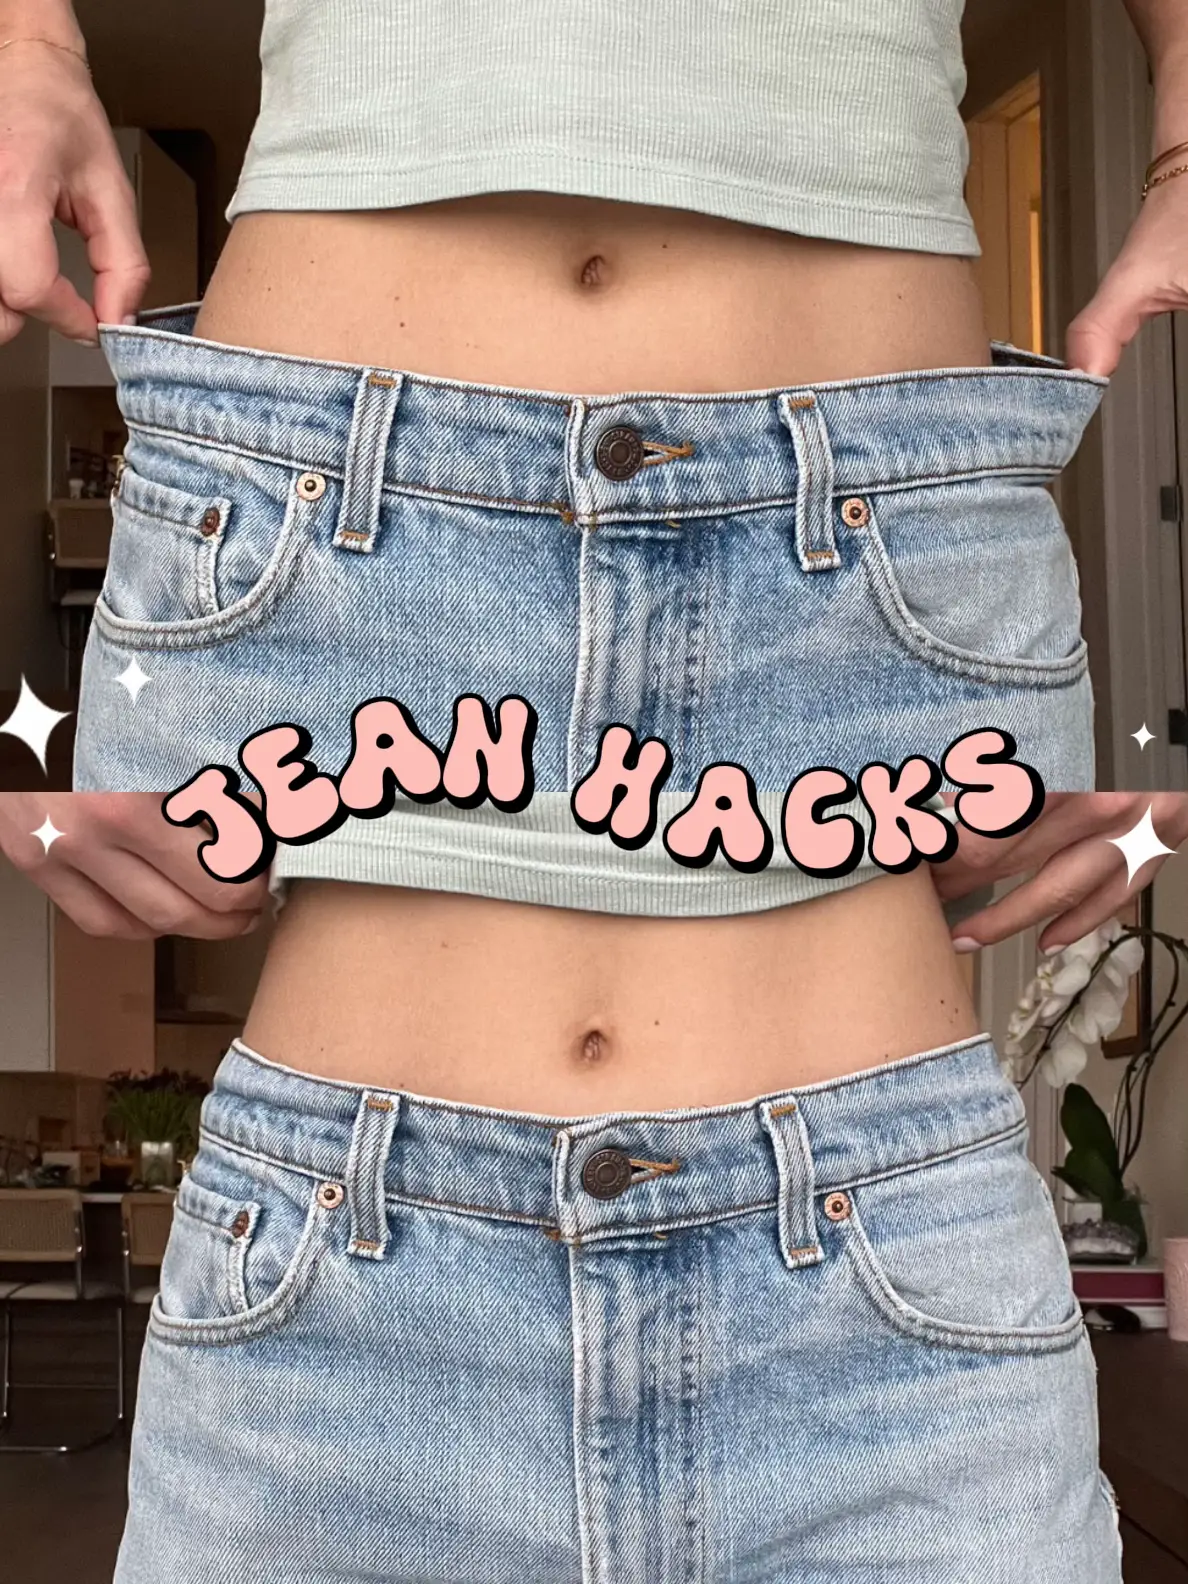 pants waist hack you need to try! 💗 Here's a quick fix for jeans tha, Jeans Hacks Waist